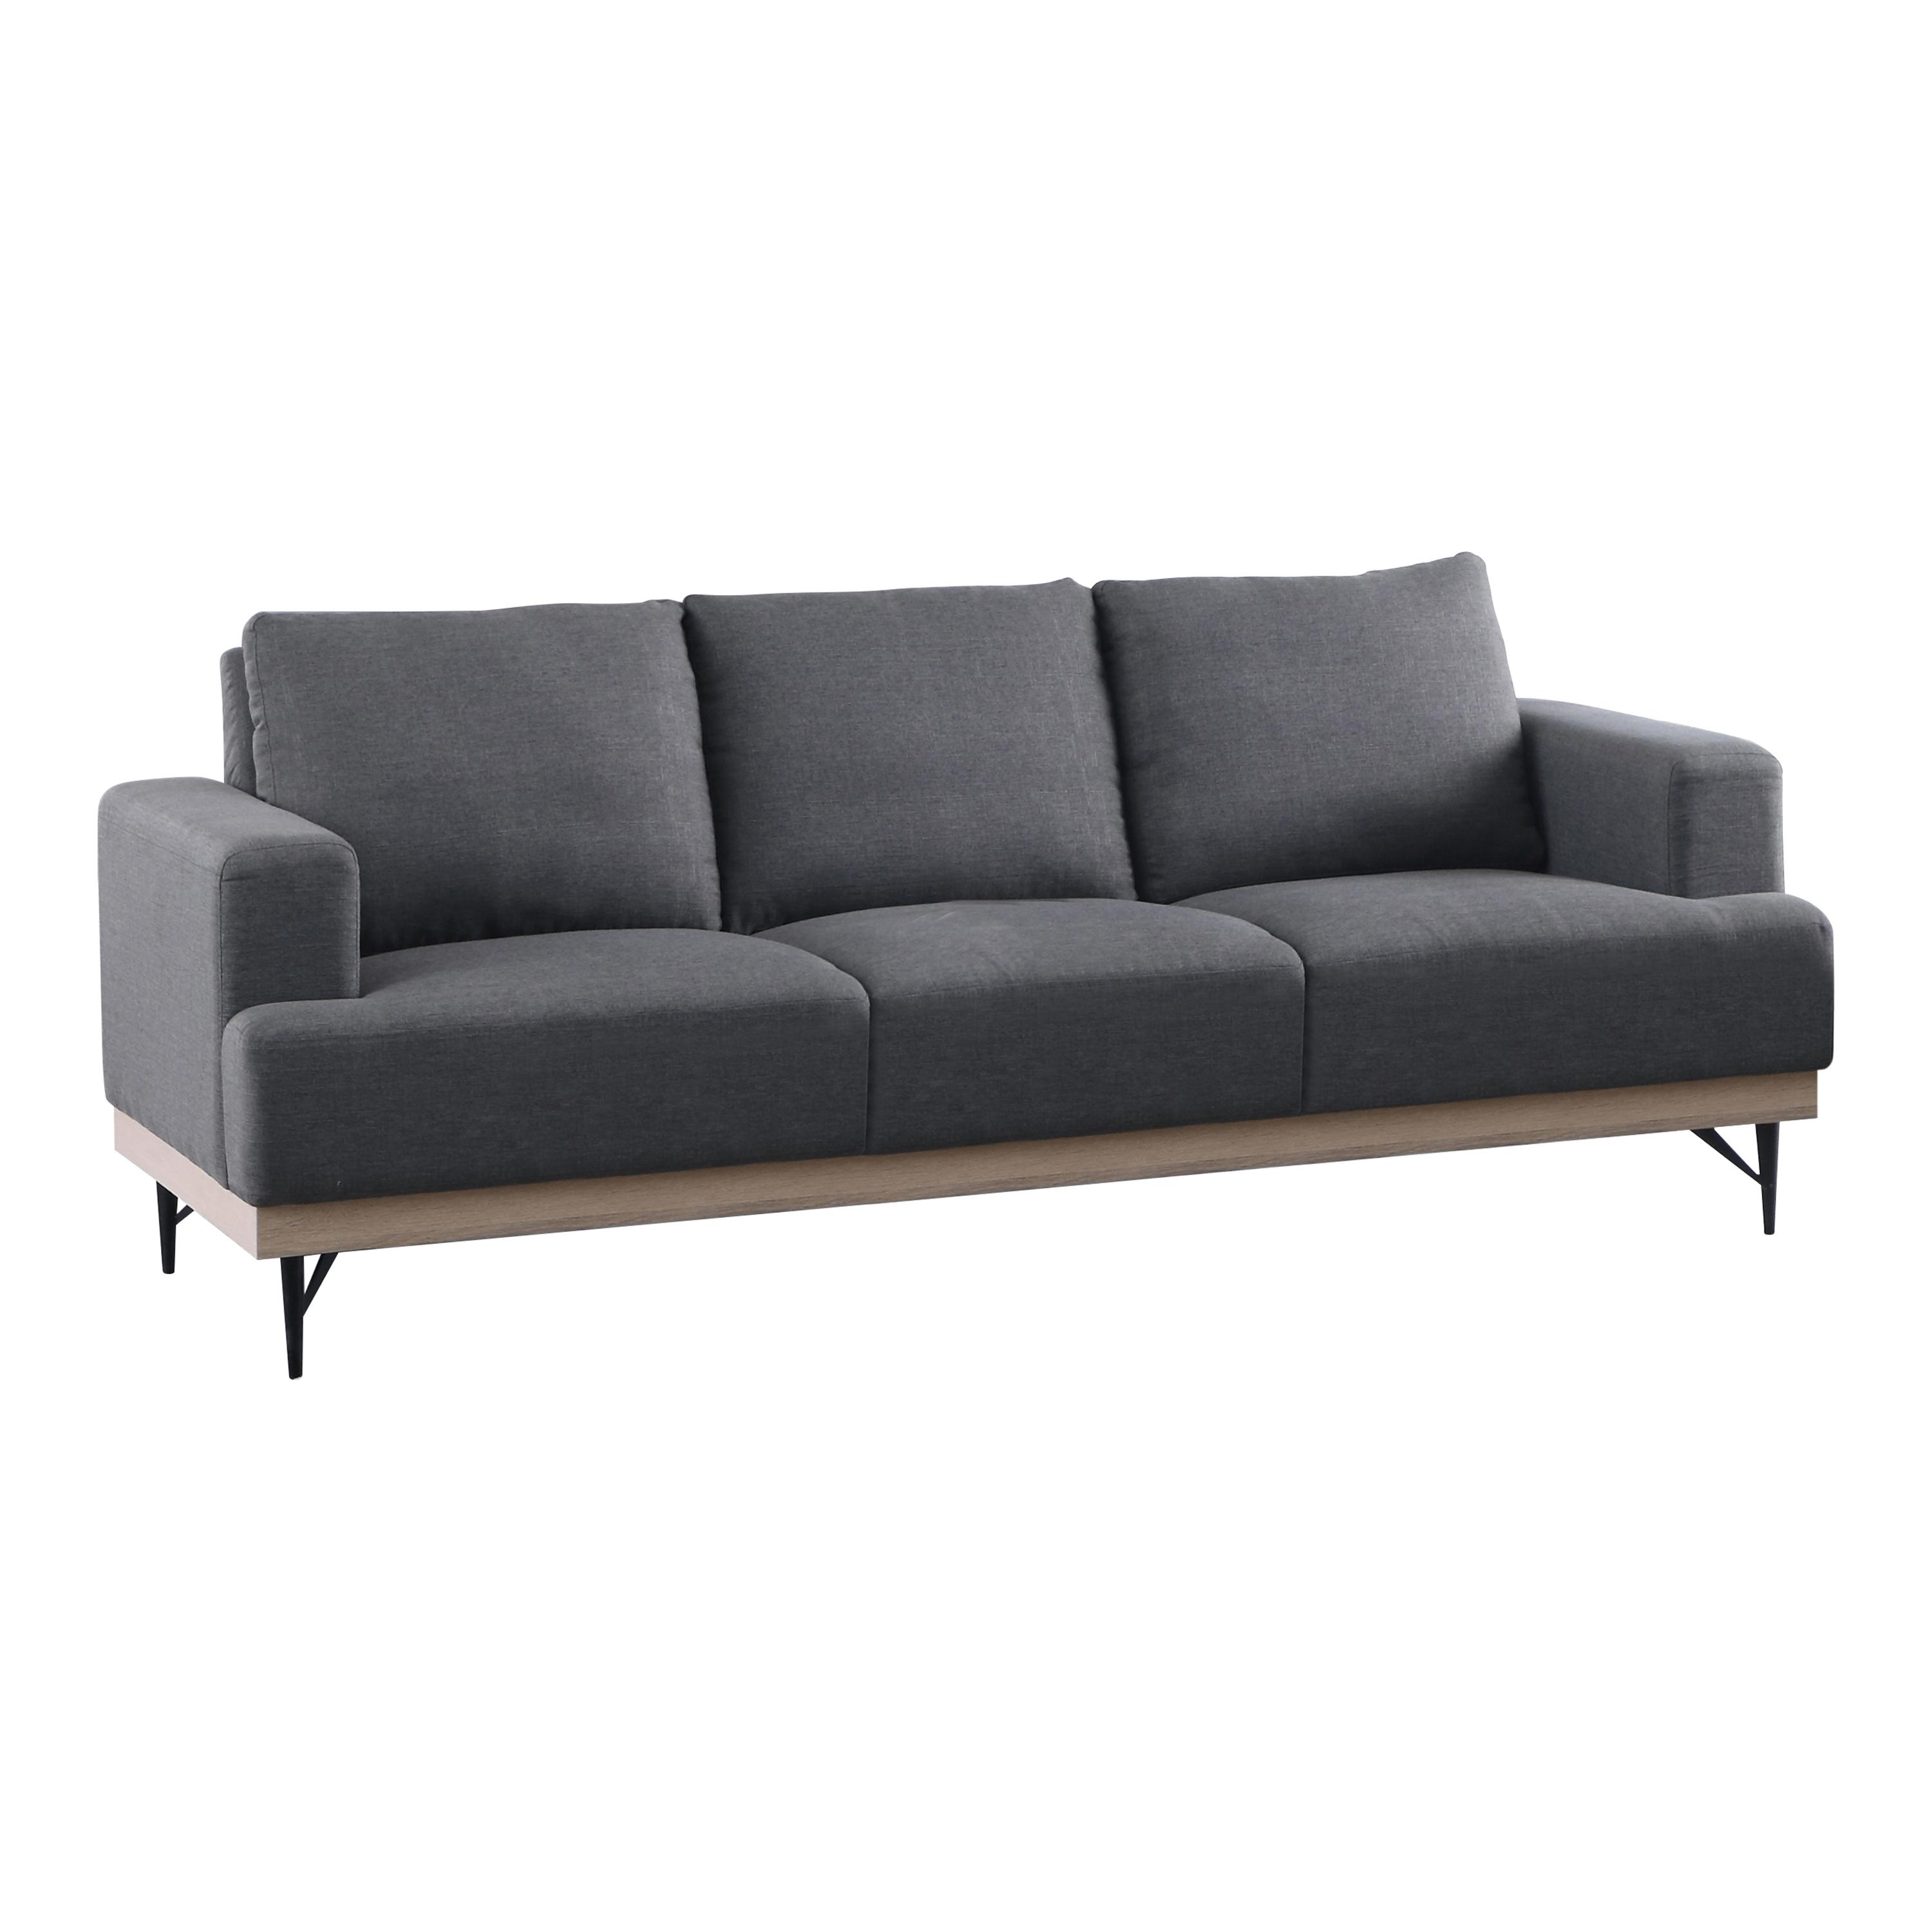 Transitional Sofa 509187 Kester 509187 in Charcoal Faux Linen